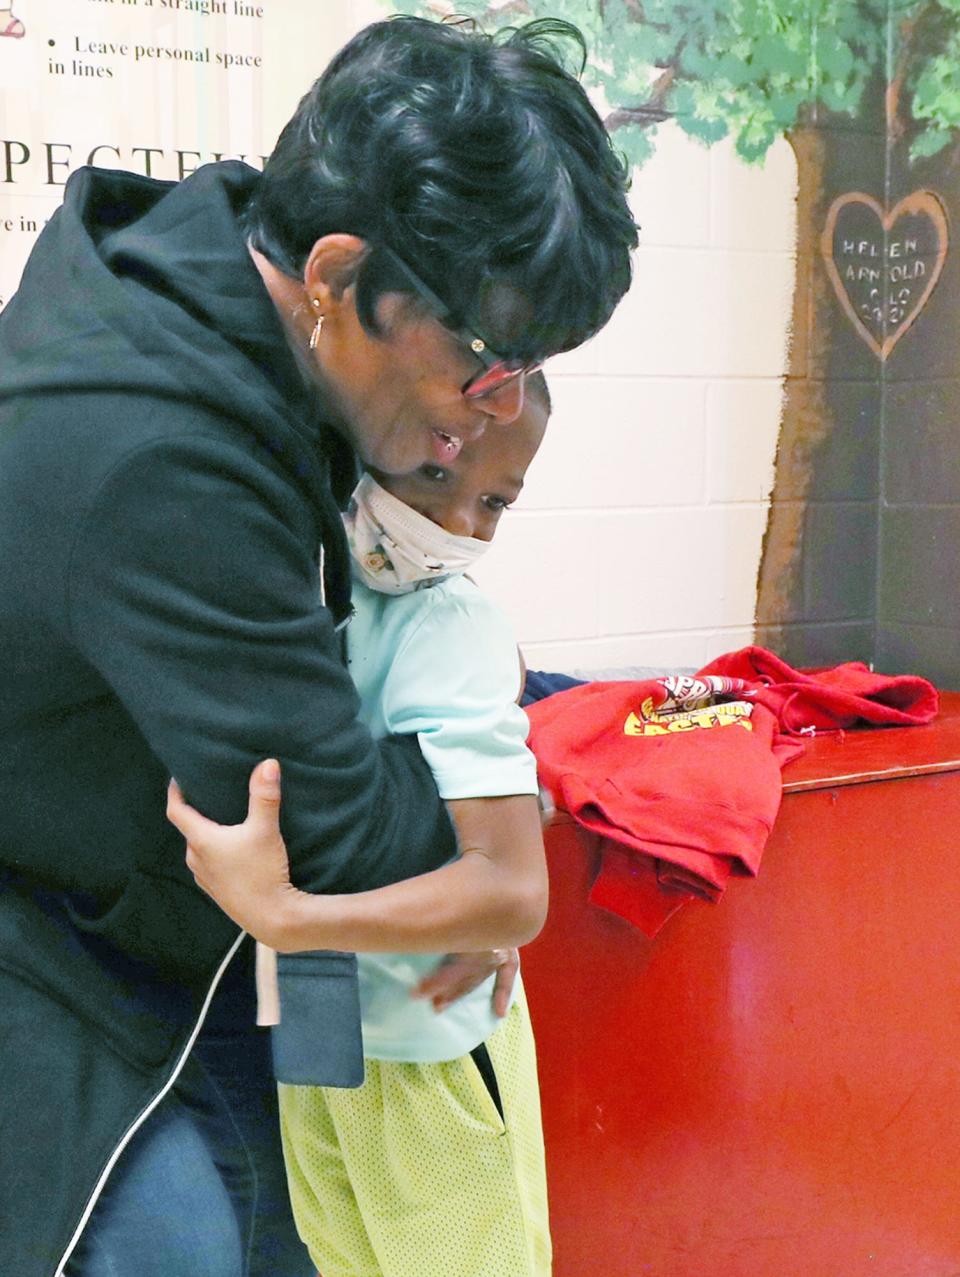 Helen Arnold first grade teacher Denise Williams hugs her former student Tyren Thompson, 7, in the hallway when he returned to the school for a visit after he was shot following a pee wee football game.